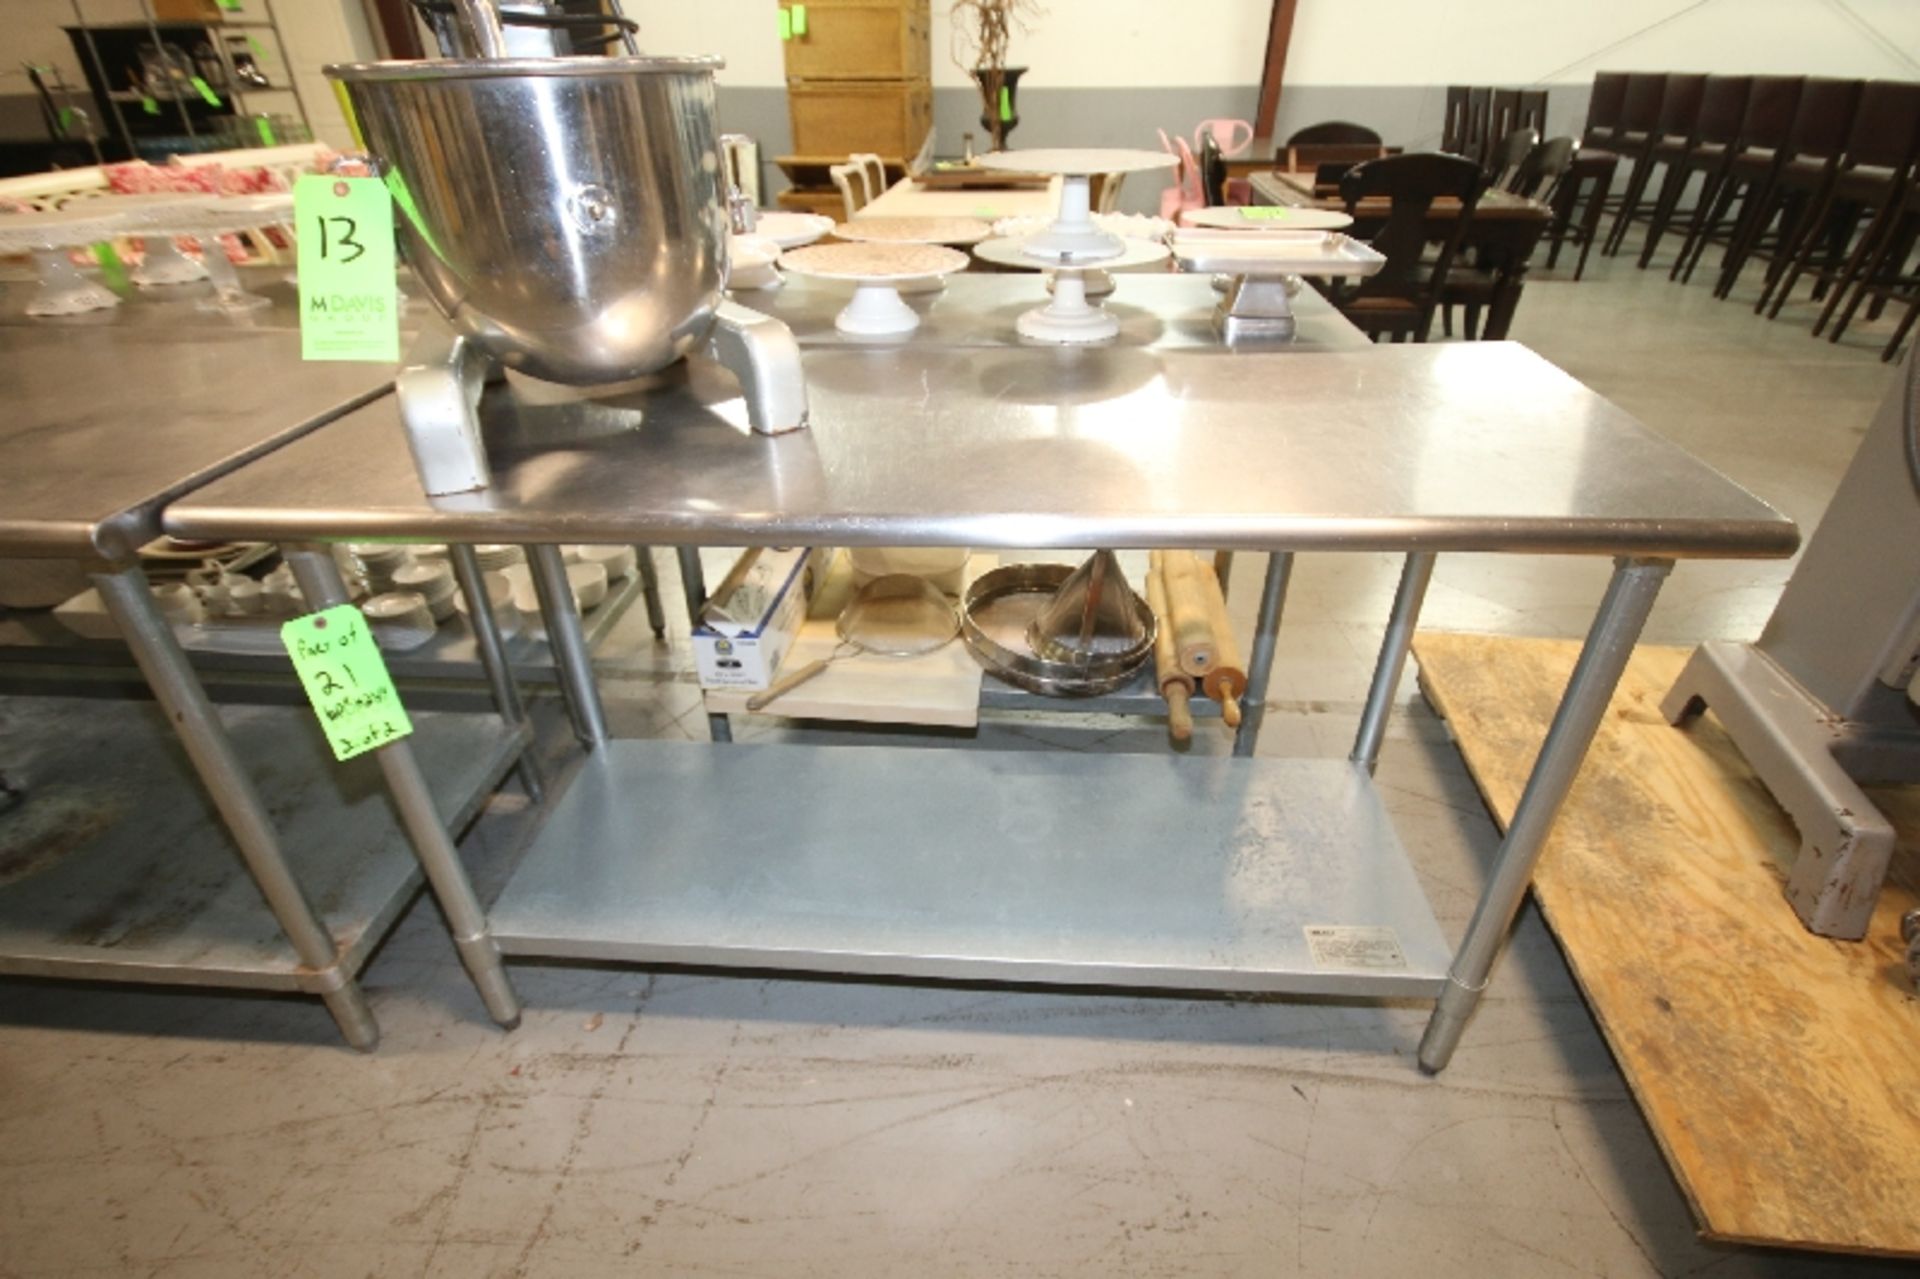 S/S Tables with Rounded Edges and Bottom Shelf, Aprox. 60" x 30" and 60" x 24" - Image 2 of 2